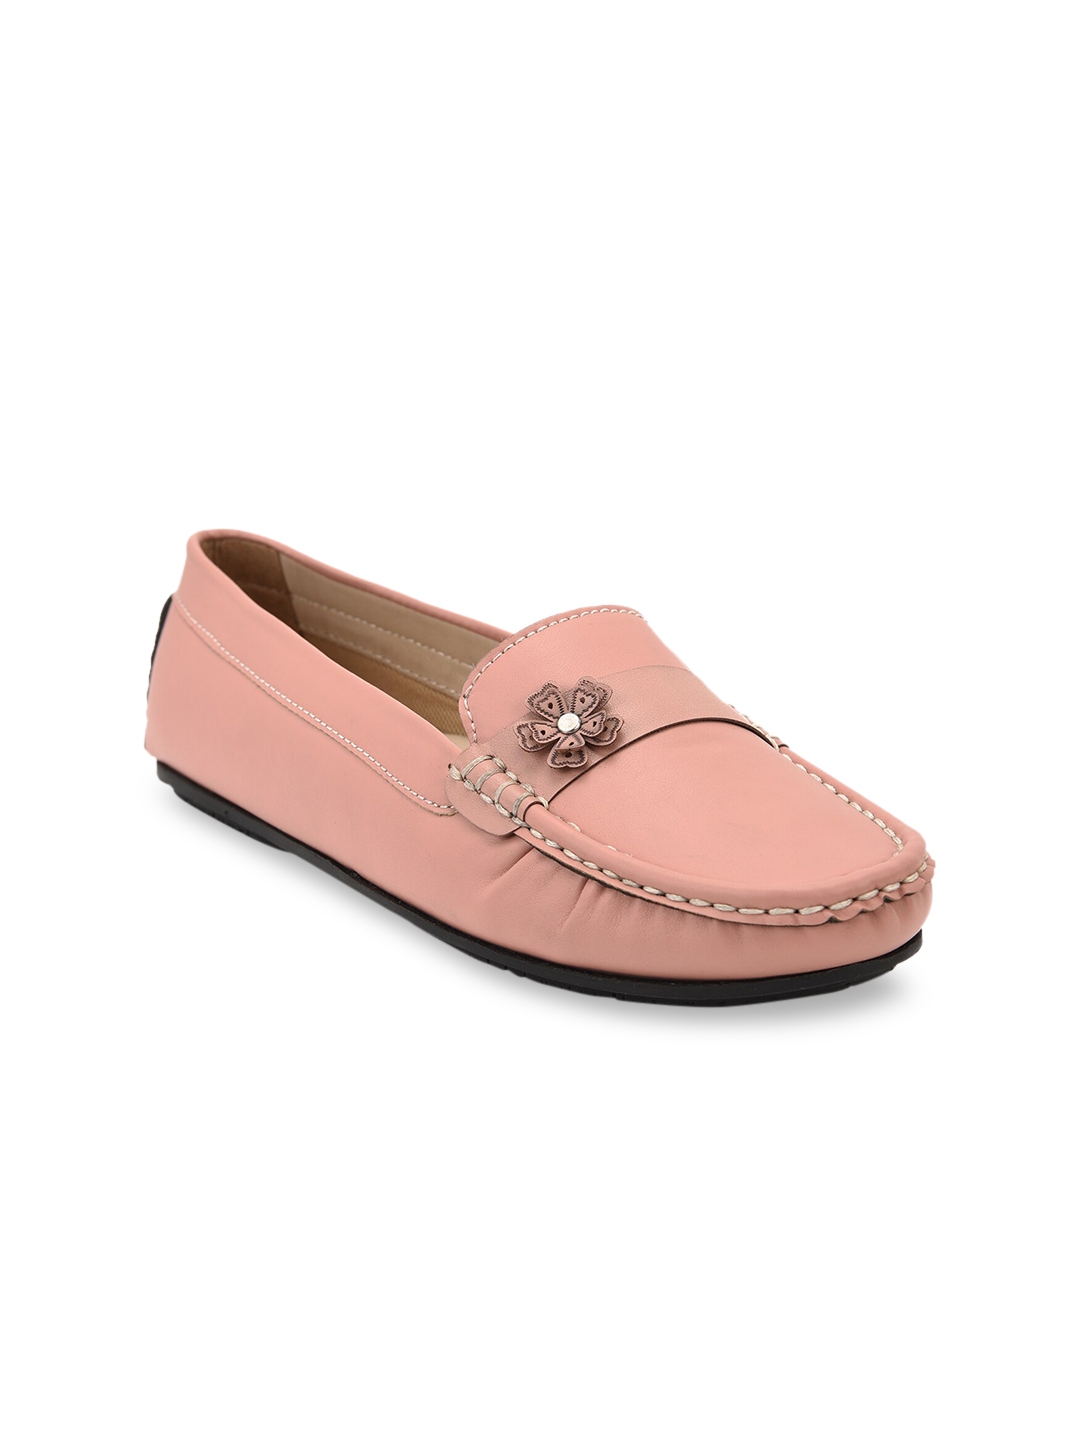 Buy Liberty Women Pink Loafers - Casual Shoes for Women 14598466 | Myntra